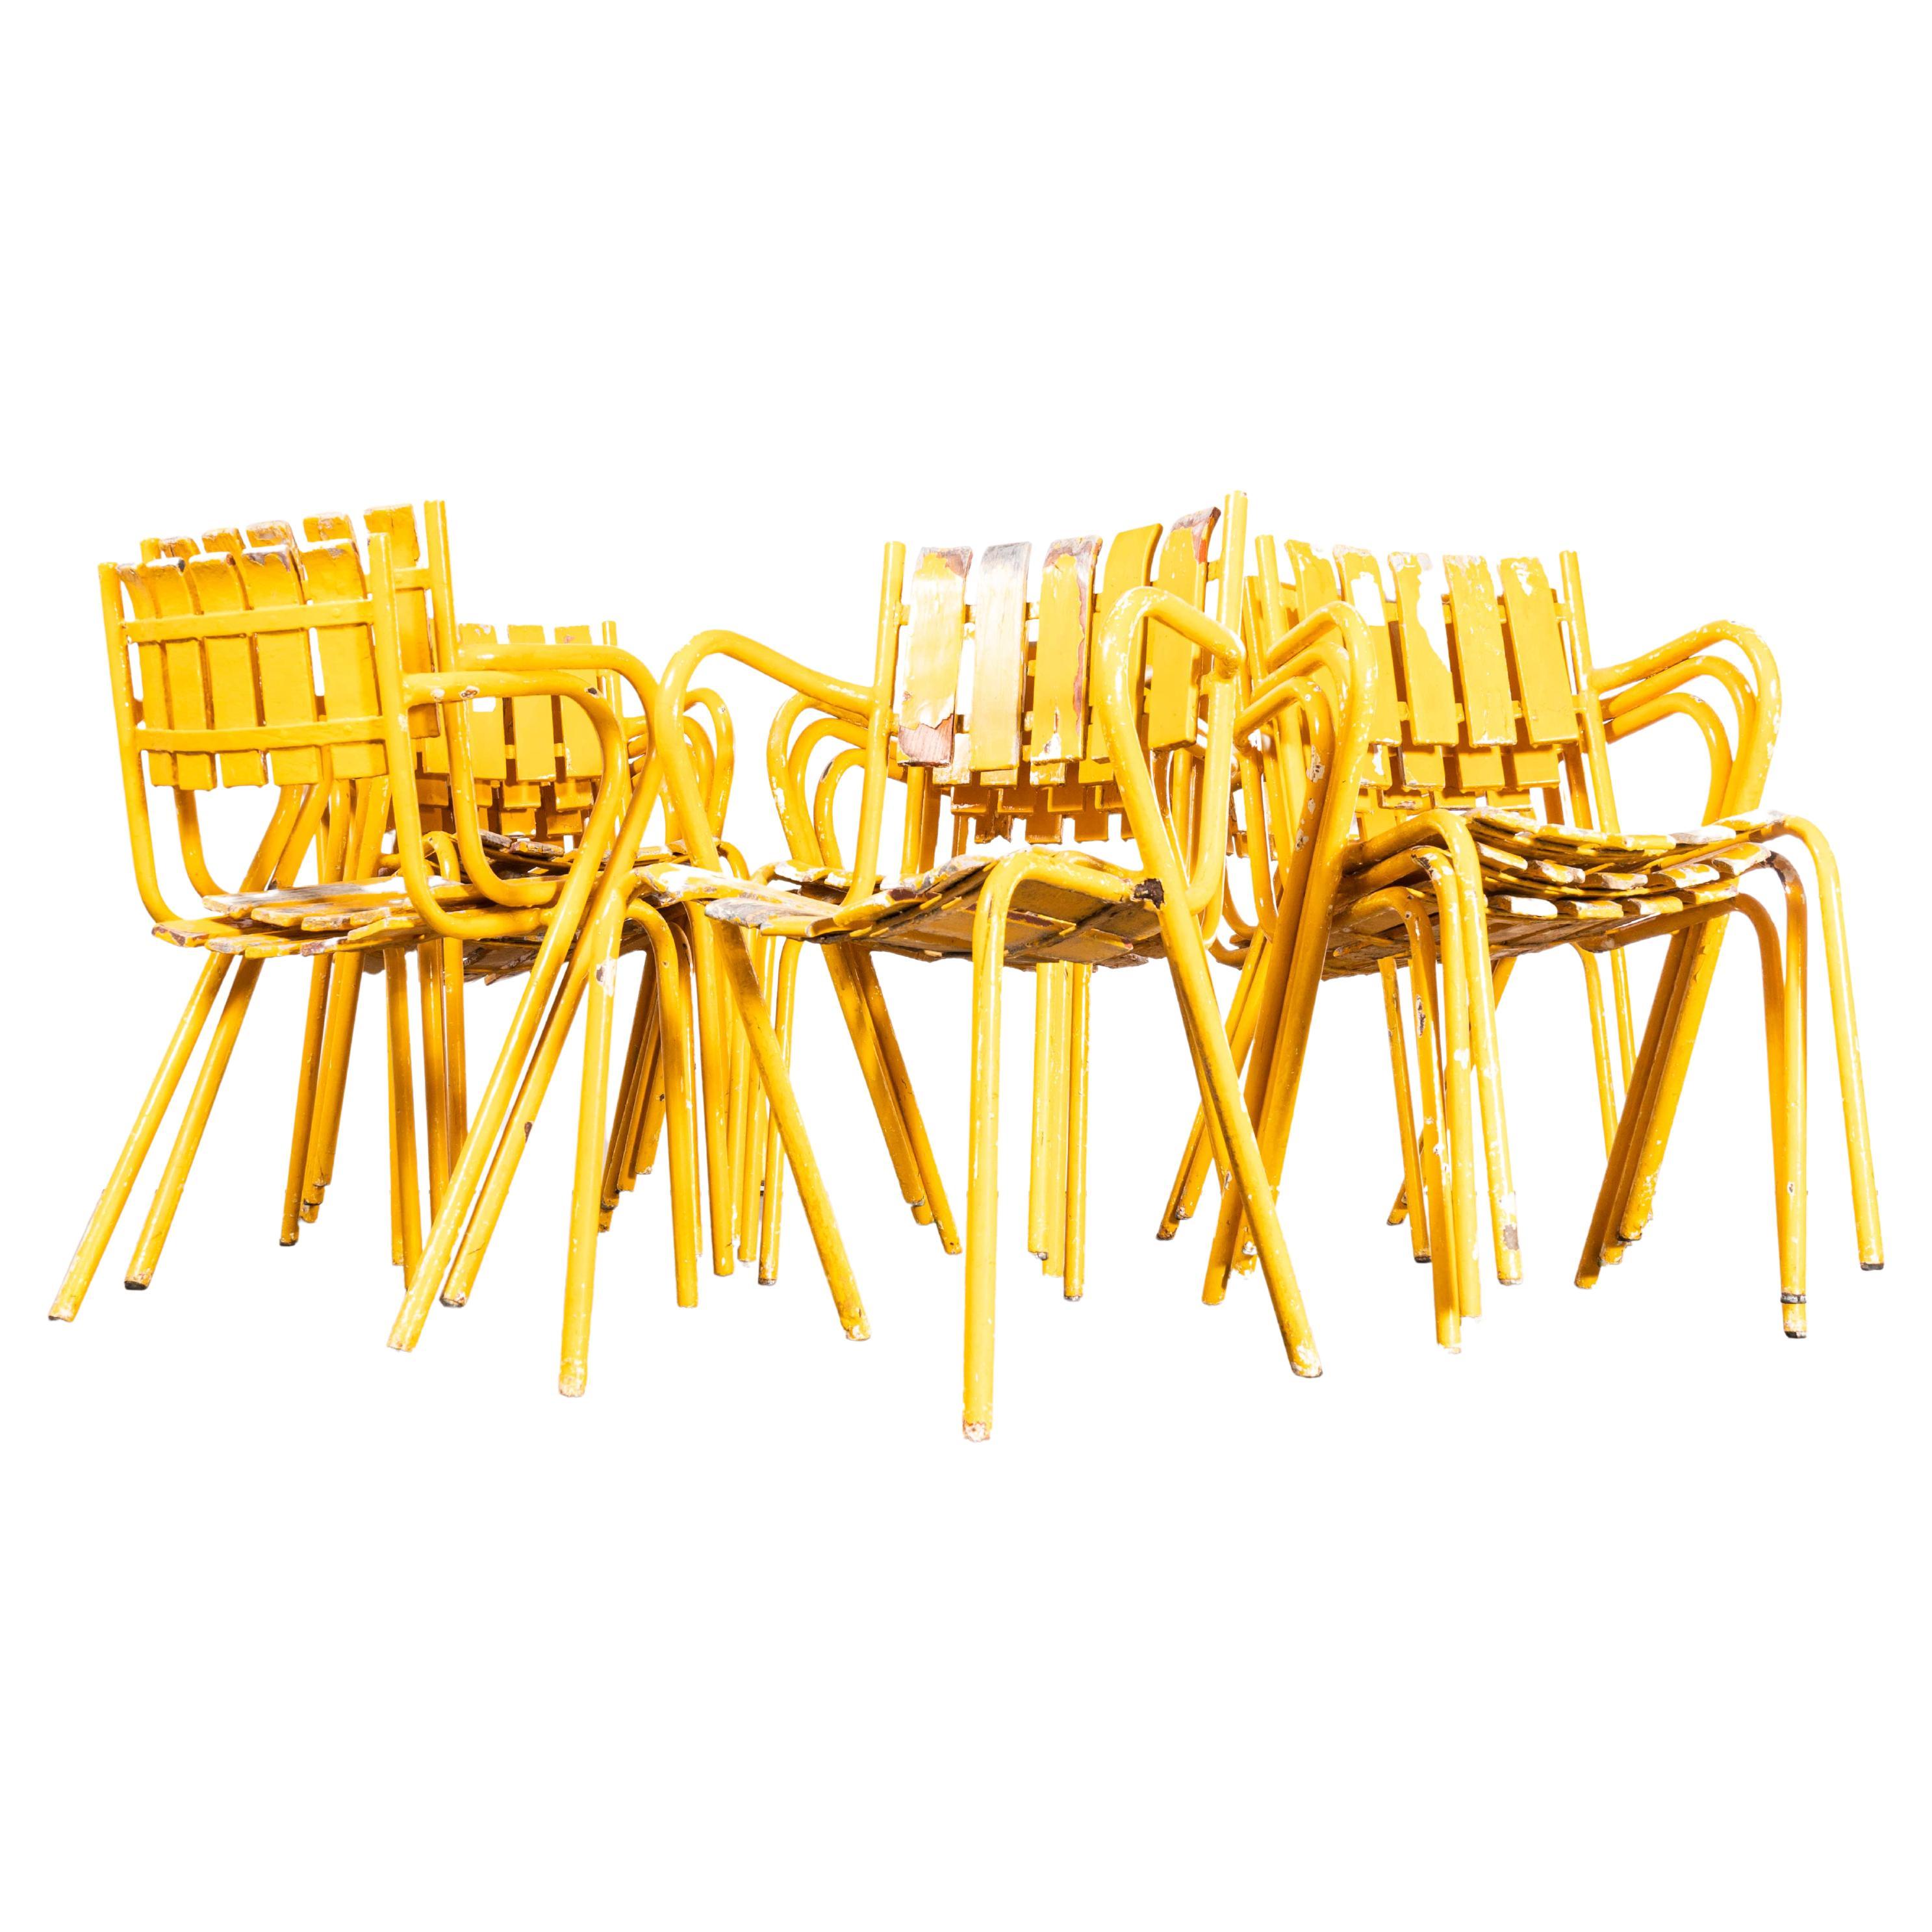 1950's Original French Outdoor Yellow Slatted Chairs - Various Quantities Availa For Sale